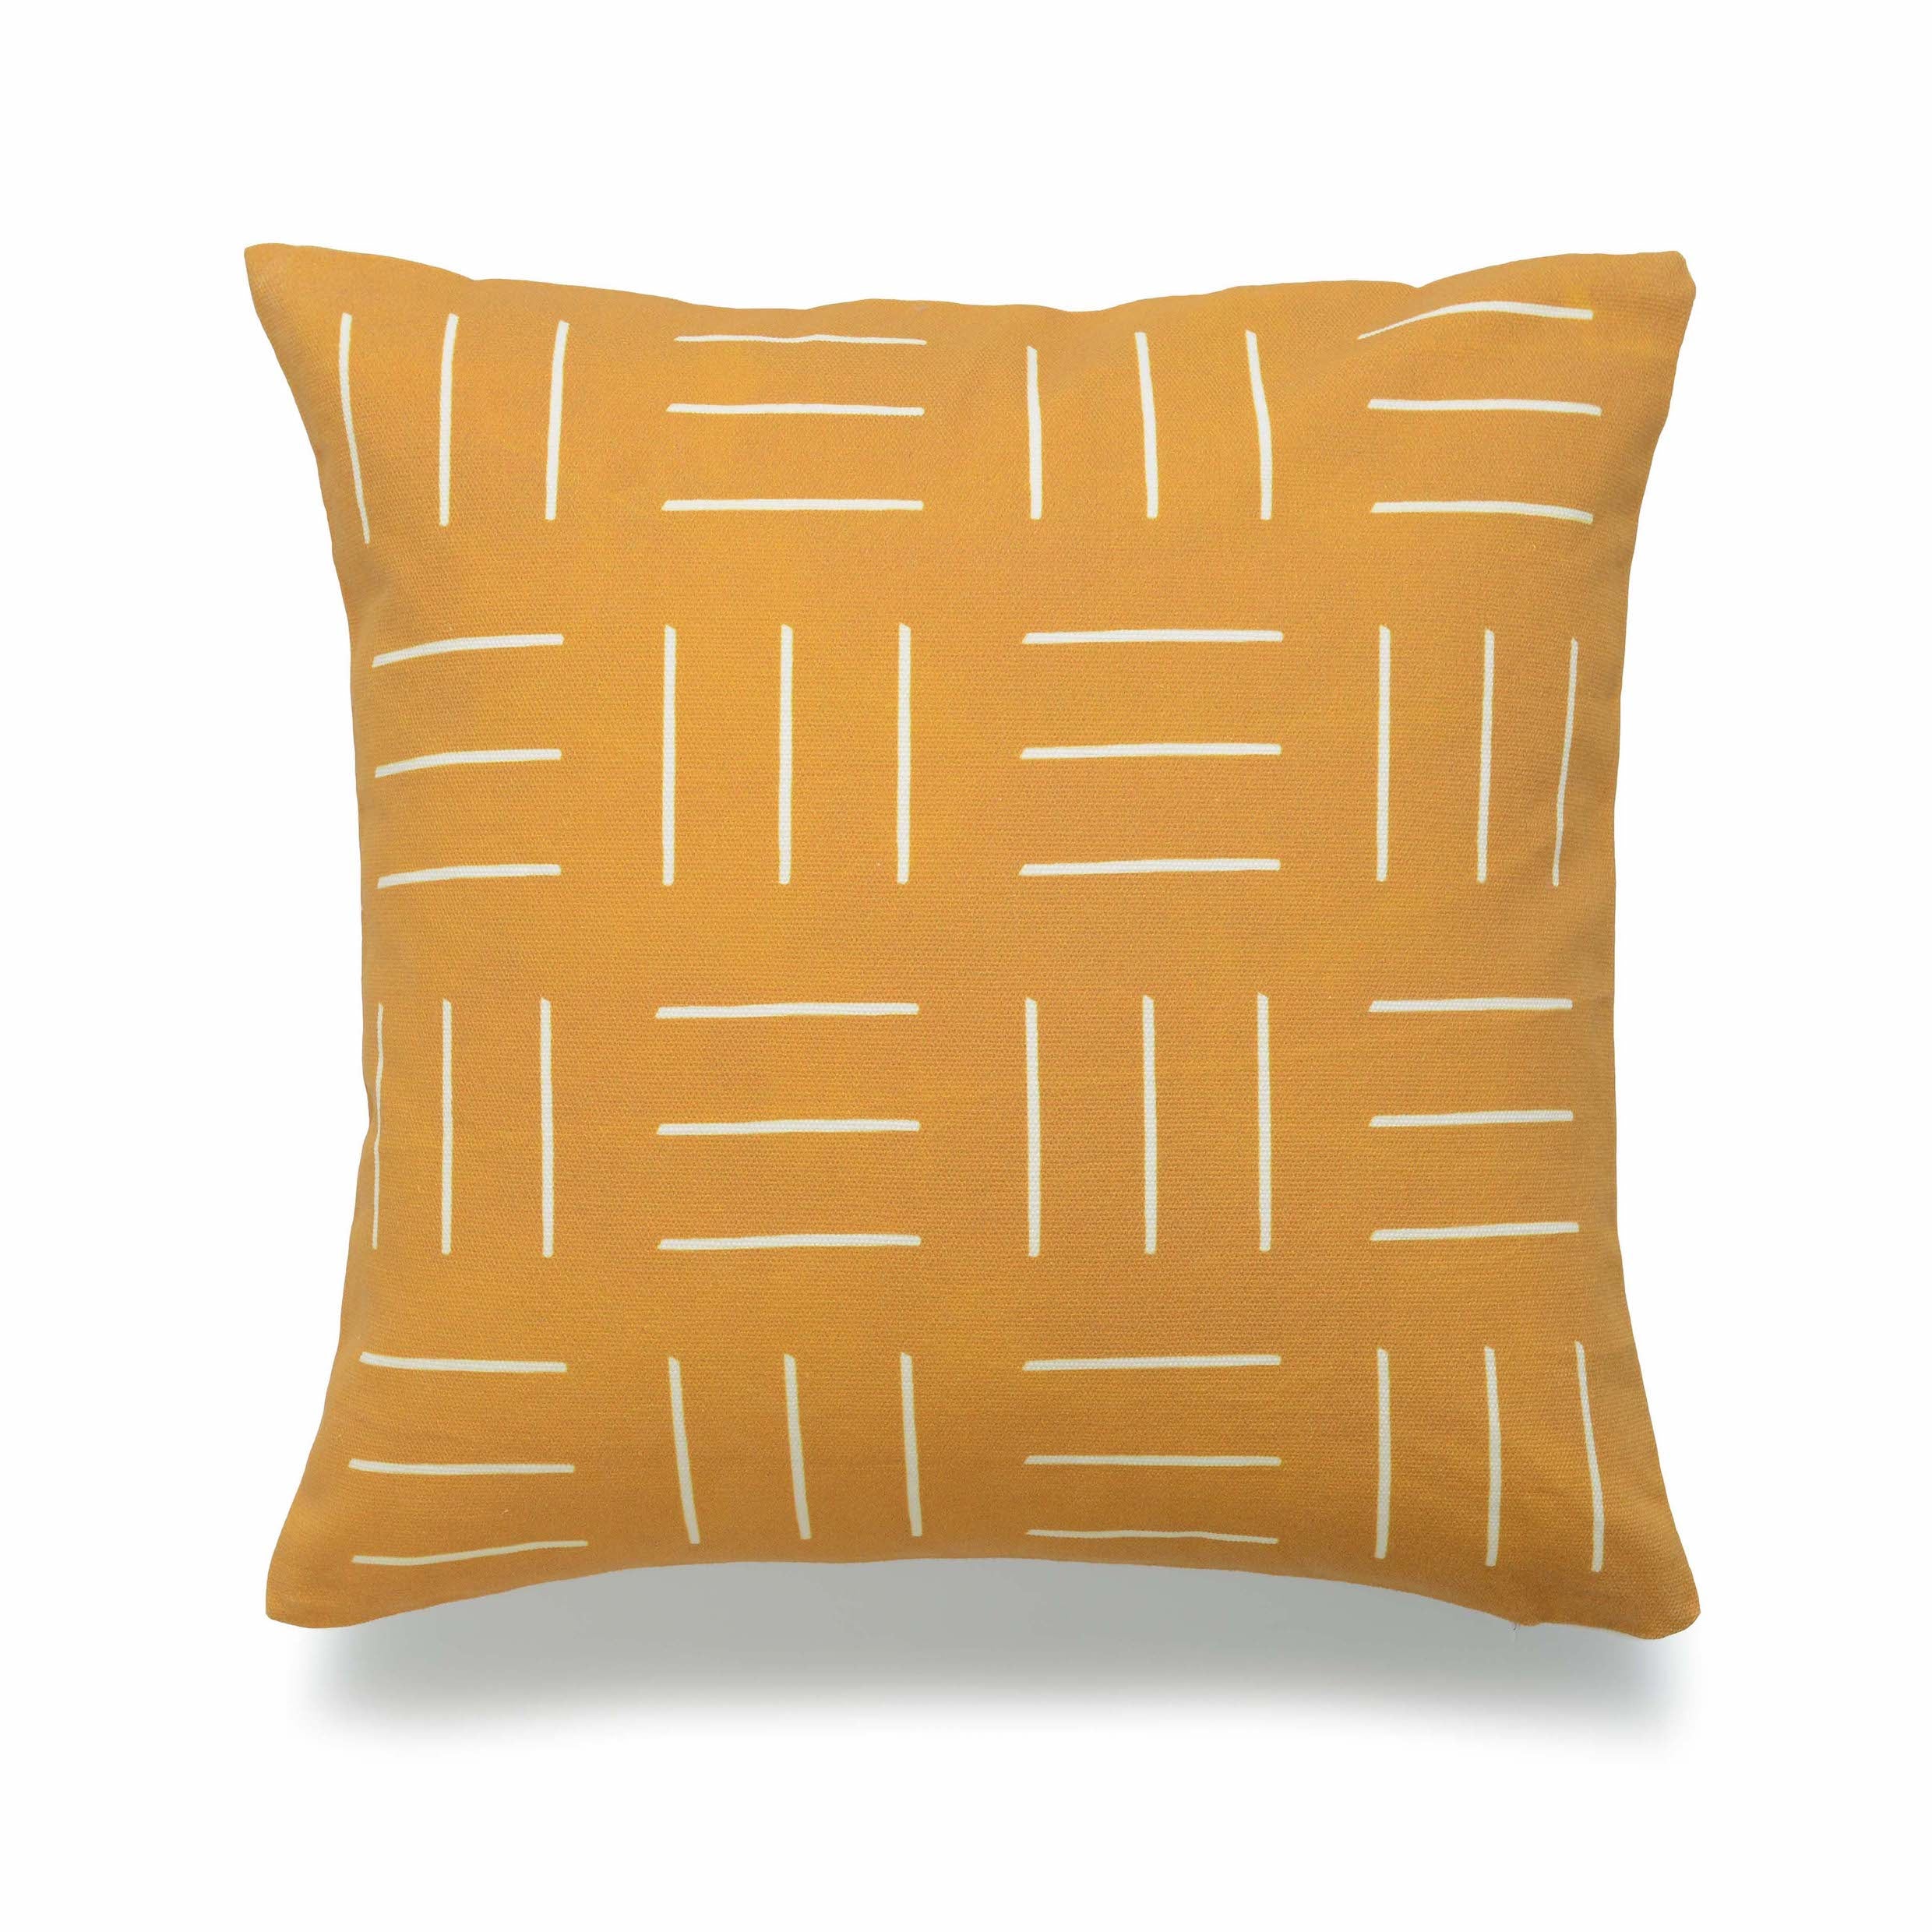 Mustard Mud Cloth Pillow Cover, Dashes, 18"x18"